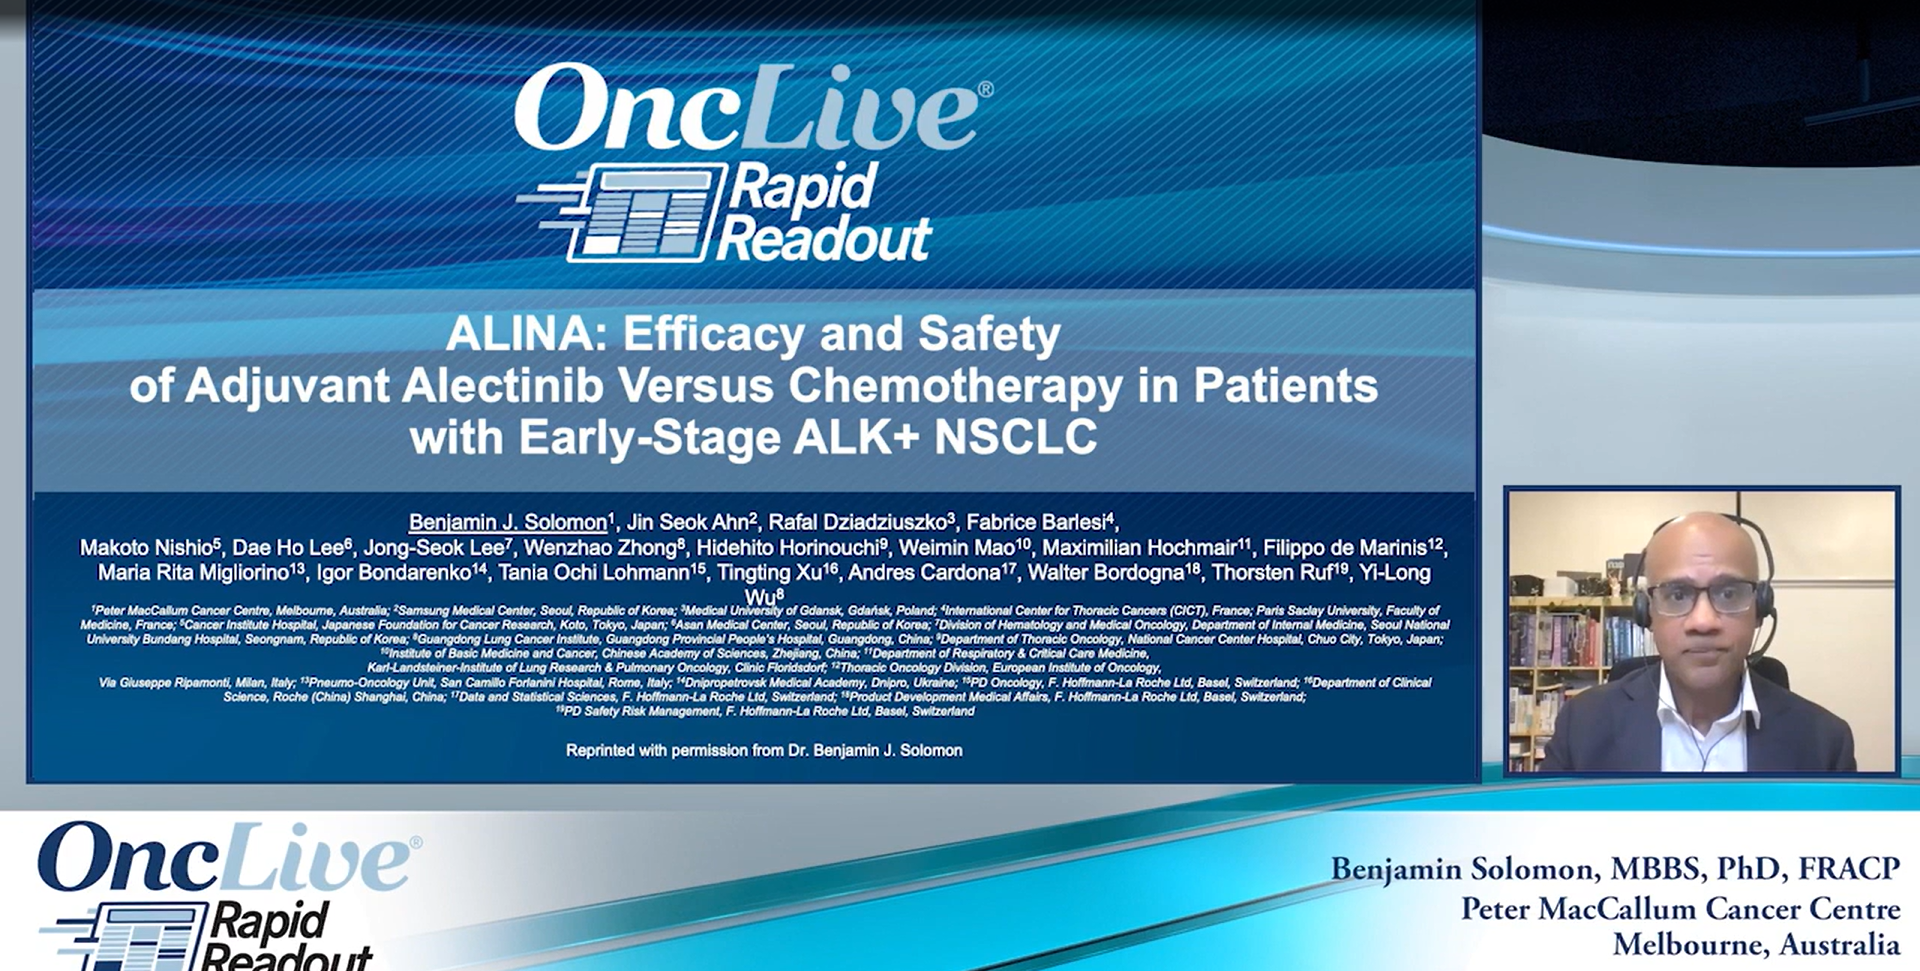 ALINA: Efficacy and Safety of Adjuvant Alectinib Versus Chemotherapy in Patients With Early-Stage ALK+ NSCLC